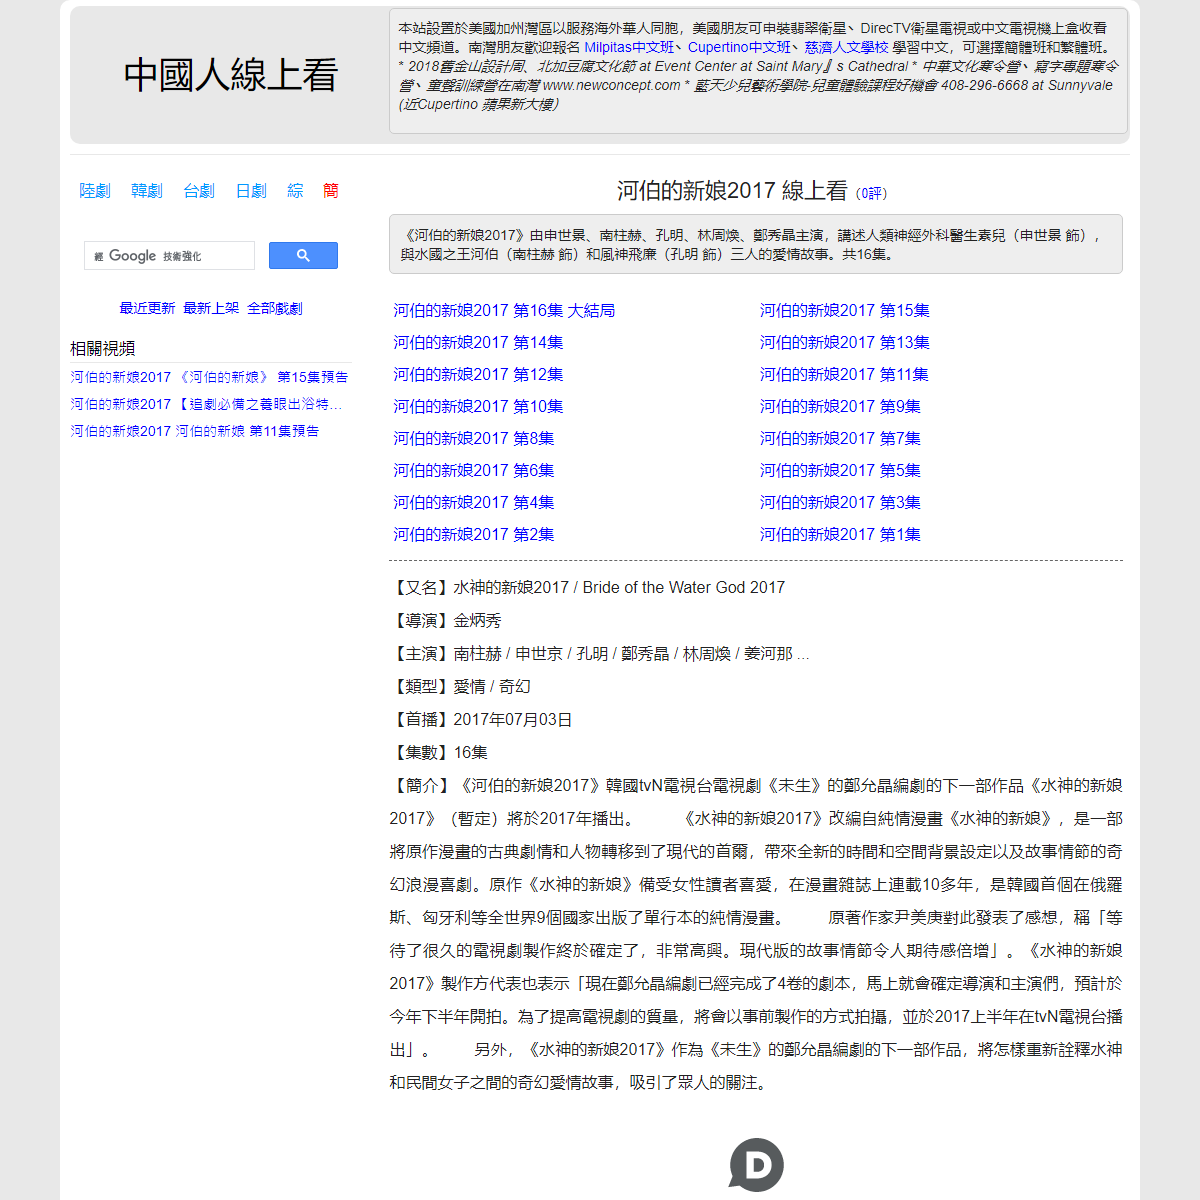 A complete backup of https://chinaq.tv/kr170703/